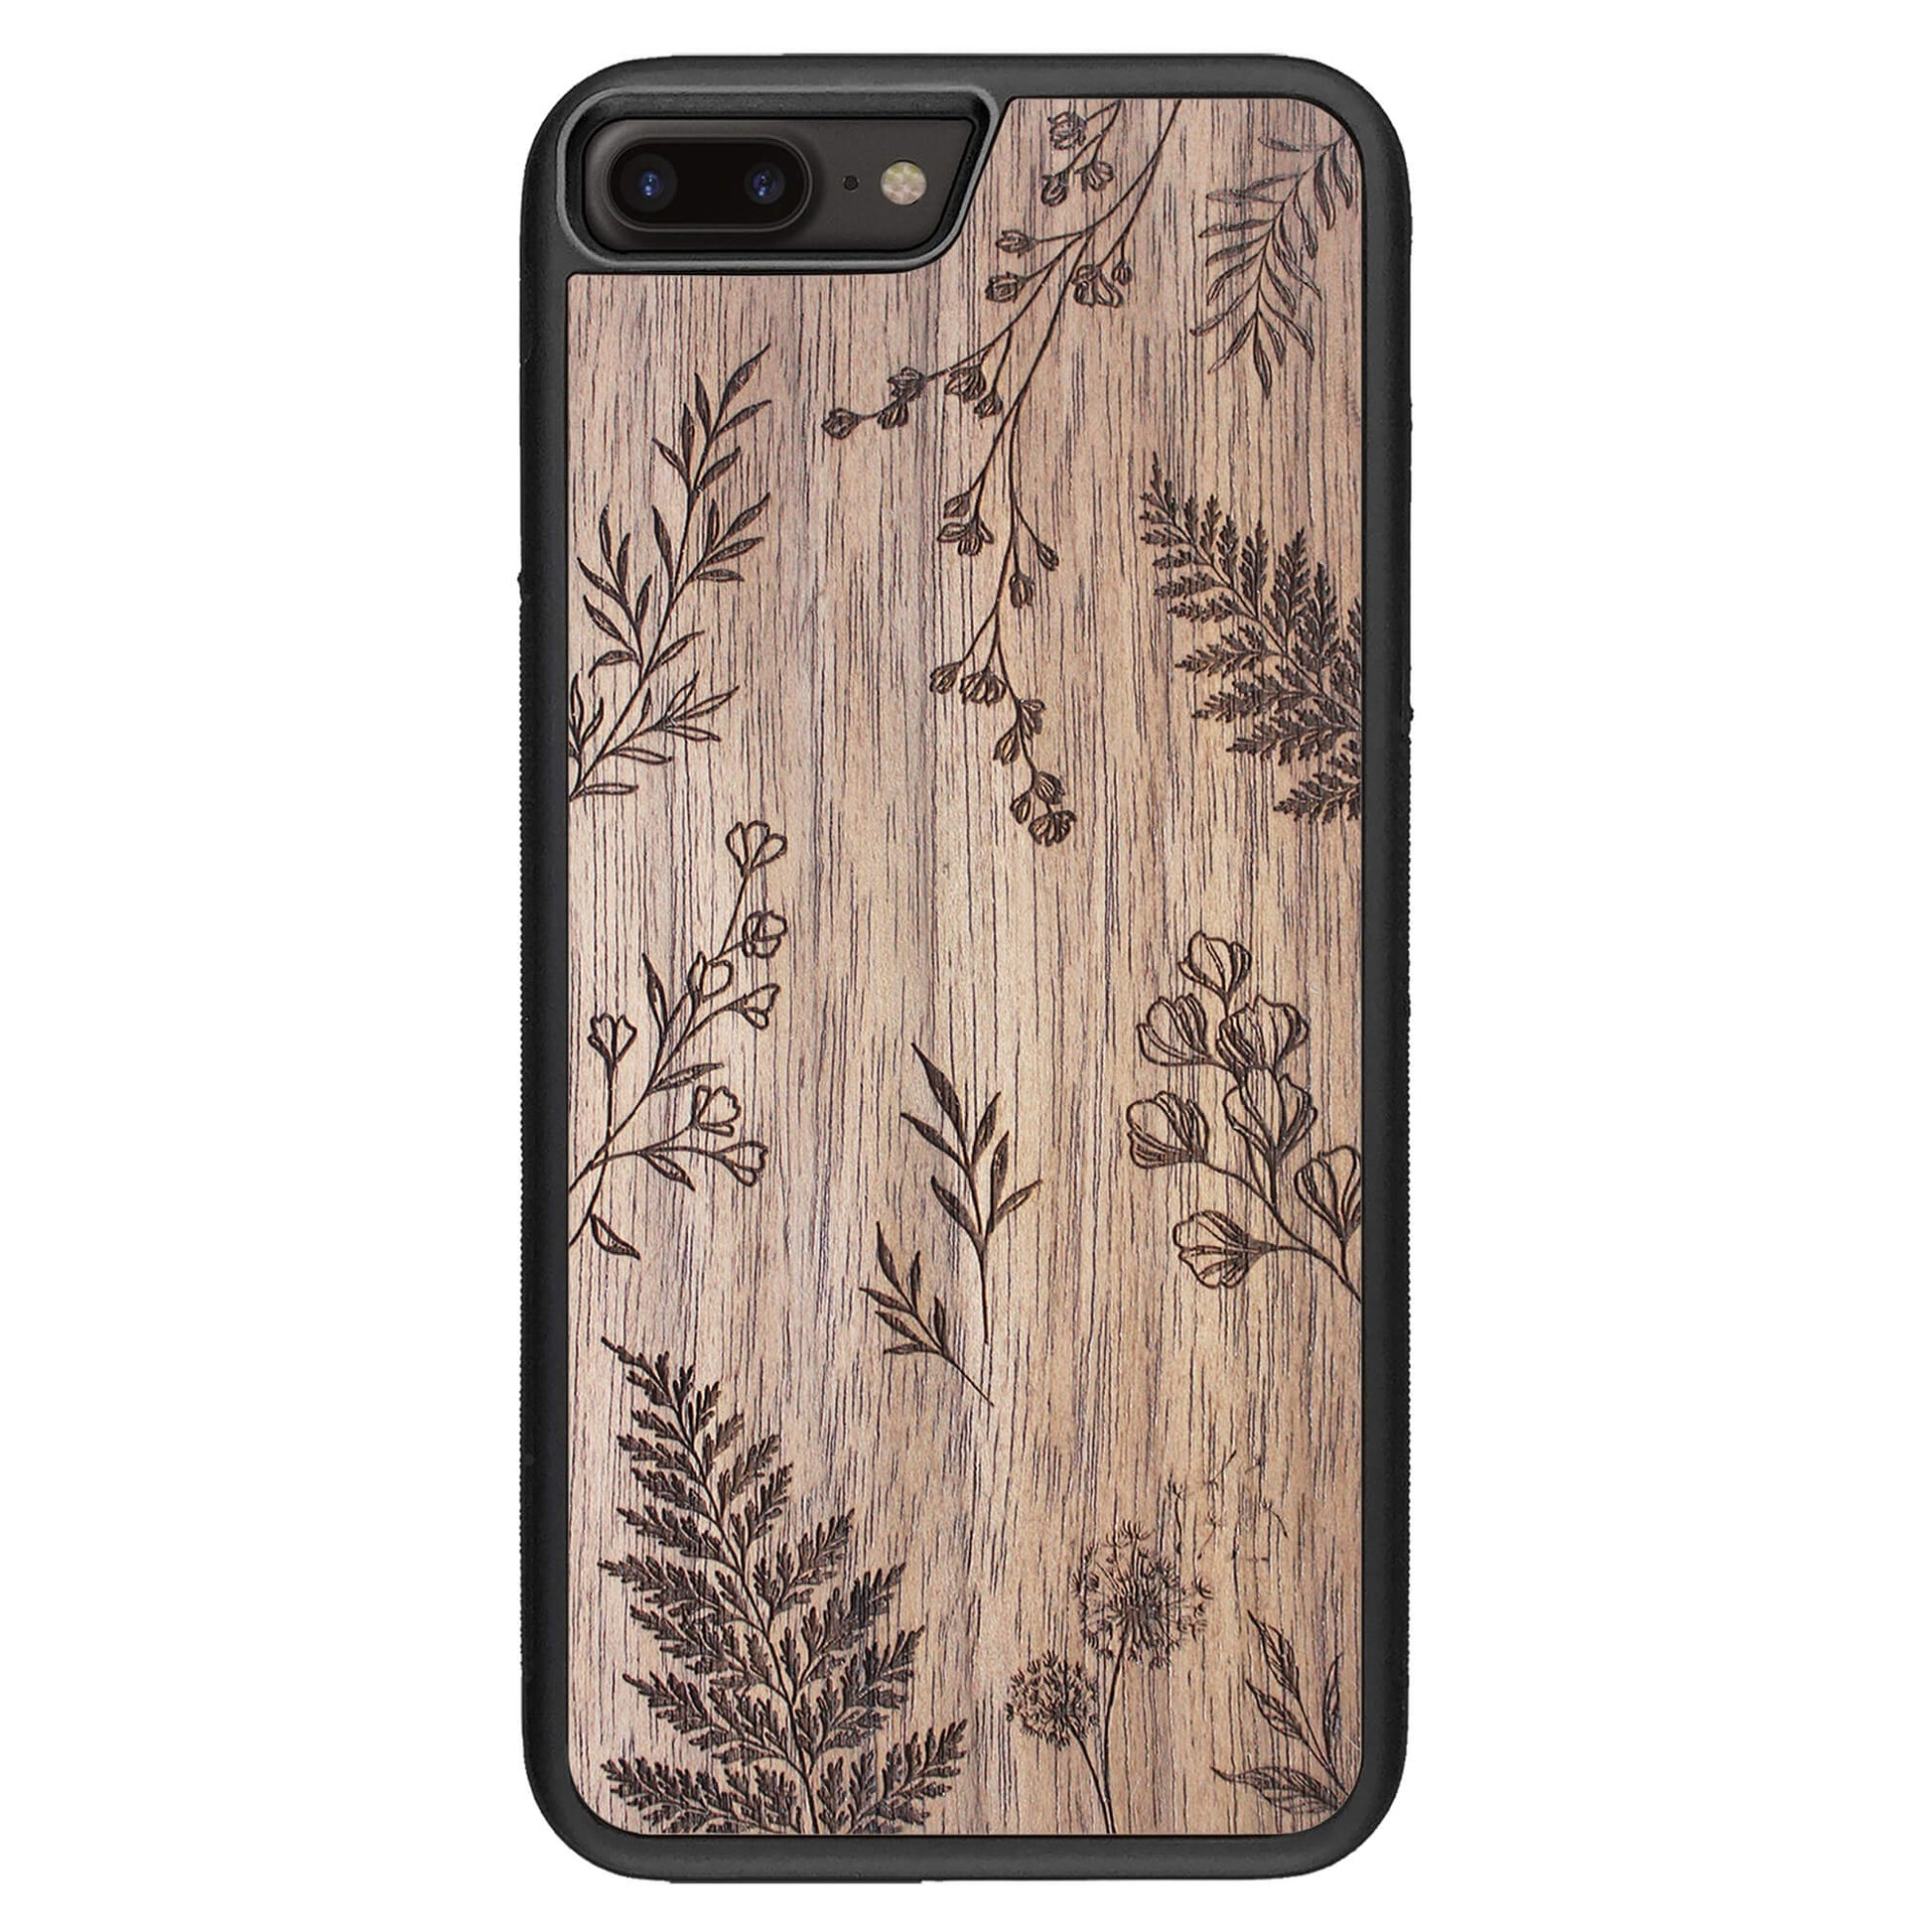 Wooden Case for iPhone 8 Plus Botanical